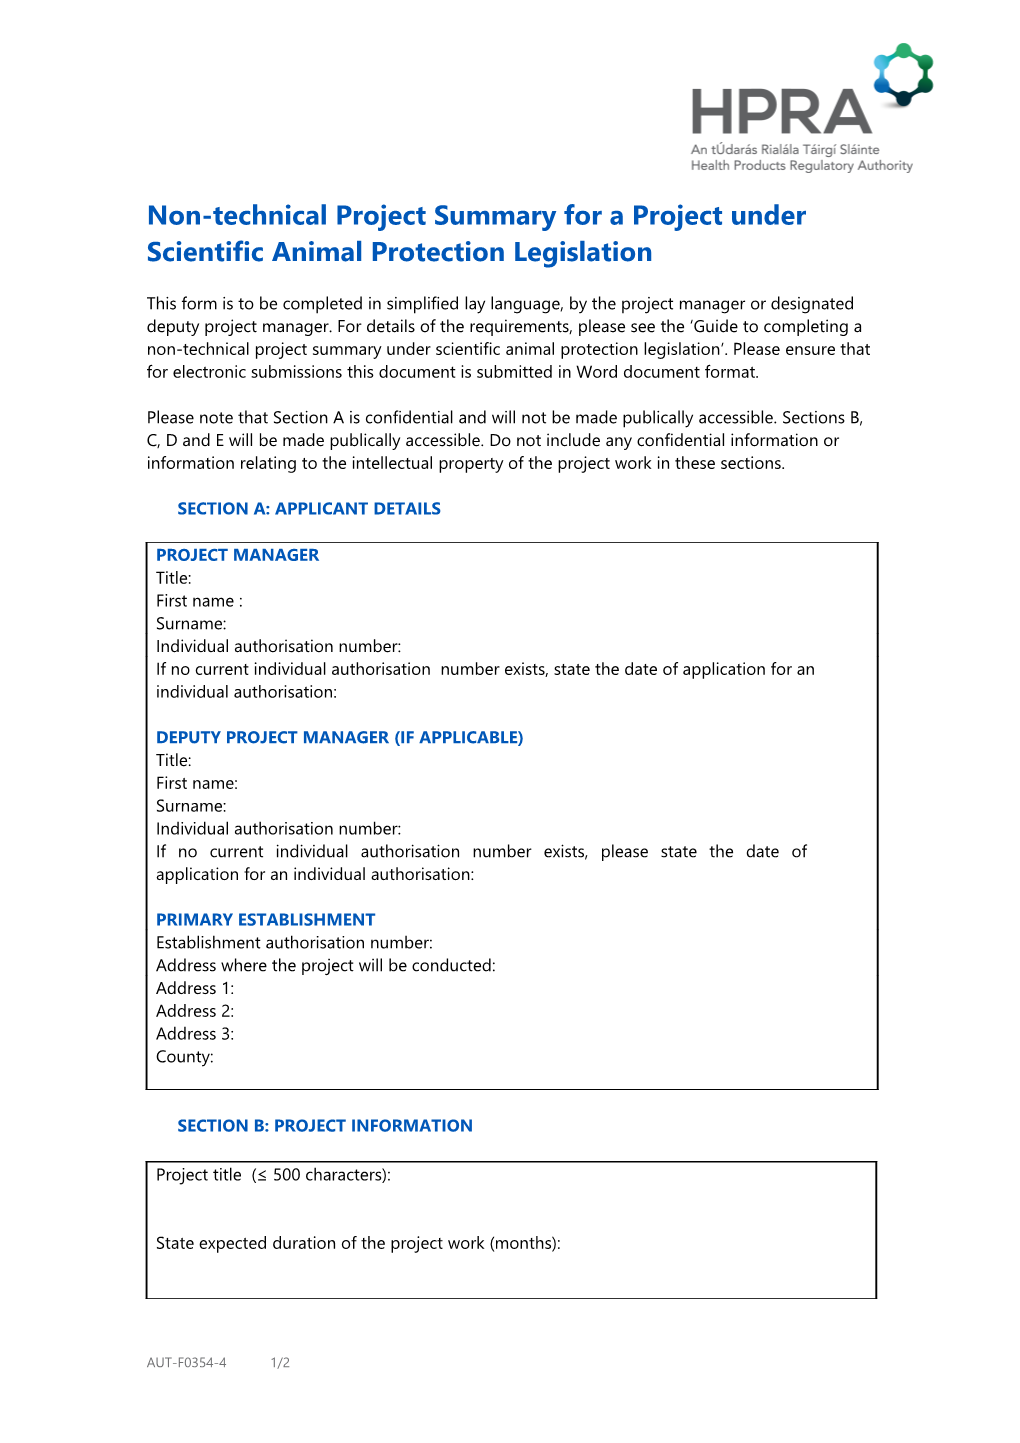 Non-Technical Project Summary for a Project Under Scientific Animal Protection Legislation